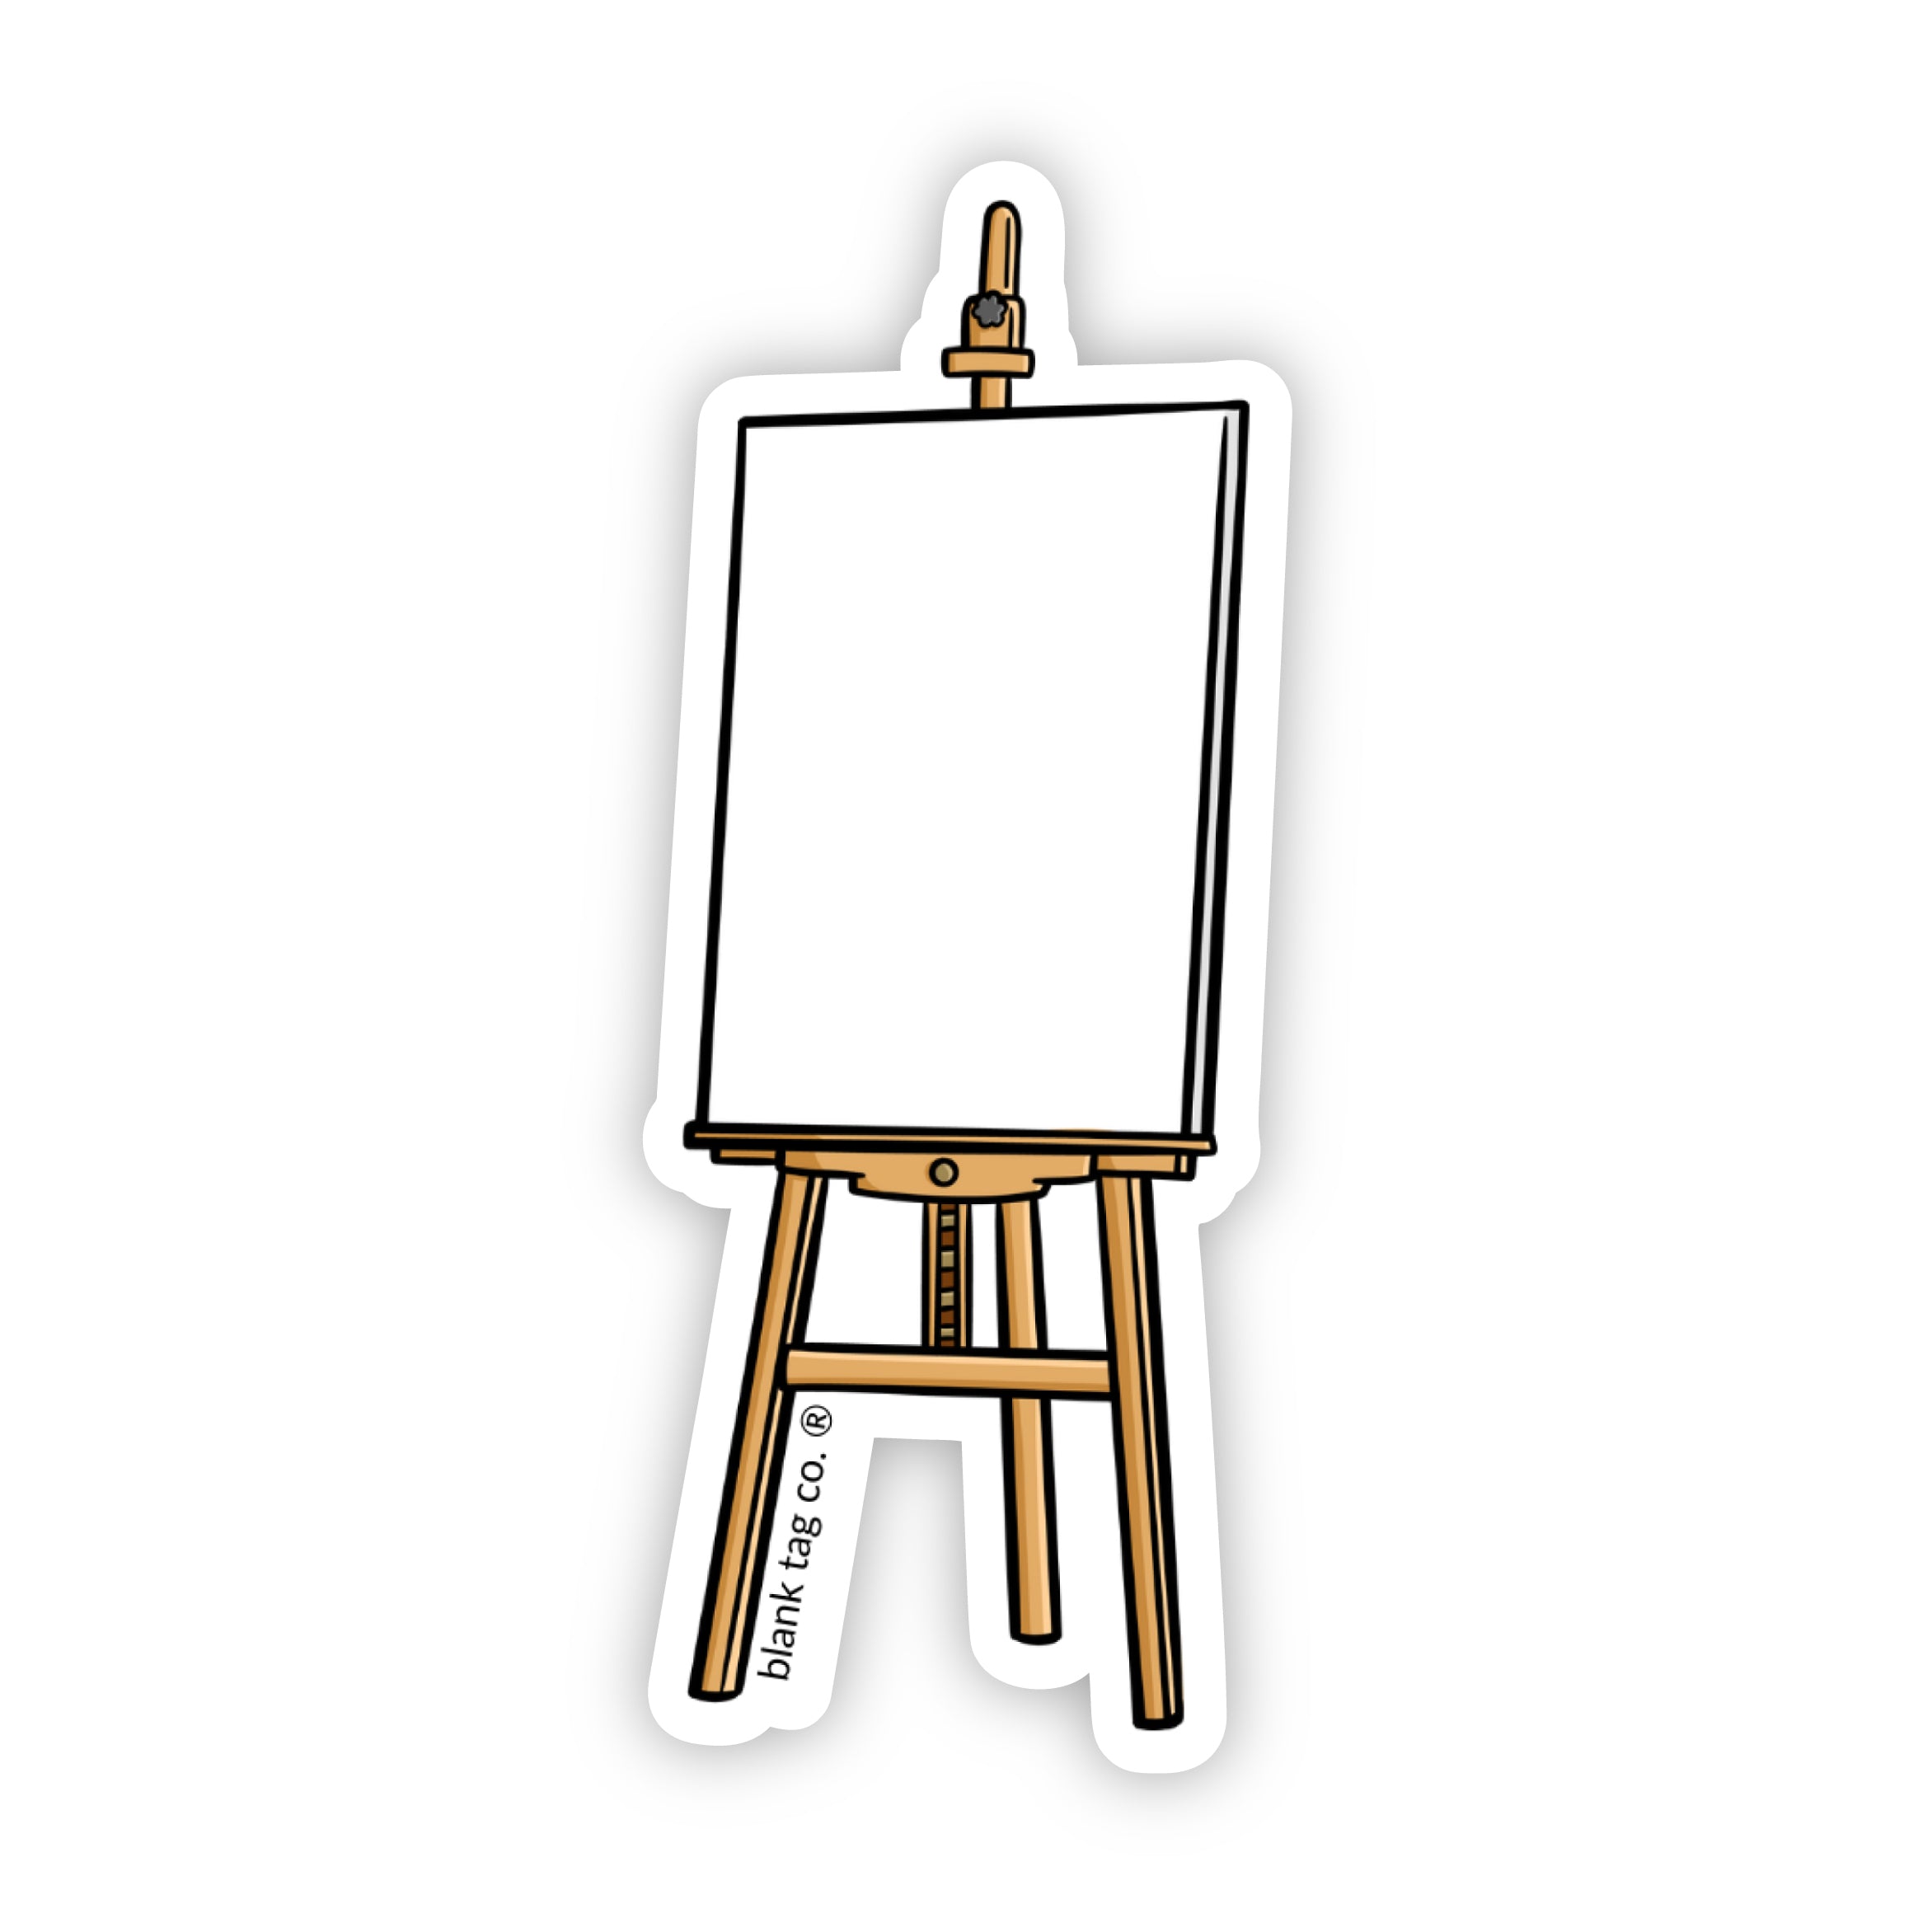 The Easel Sticker